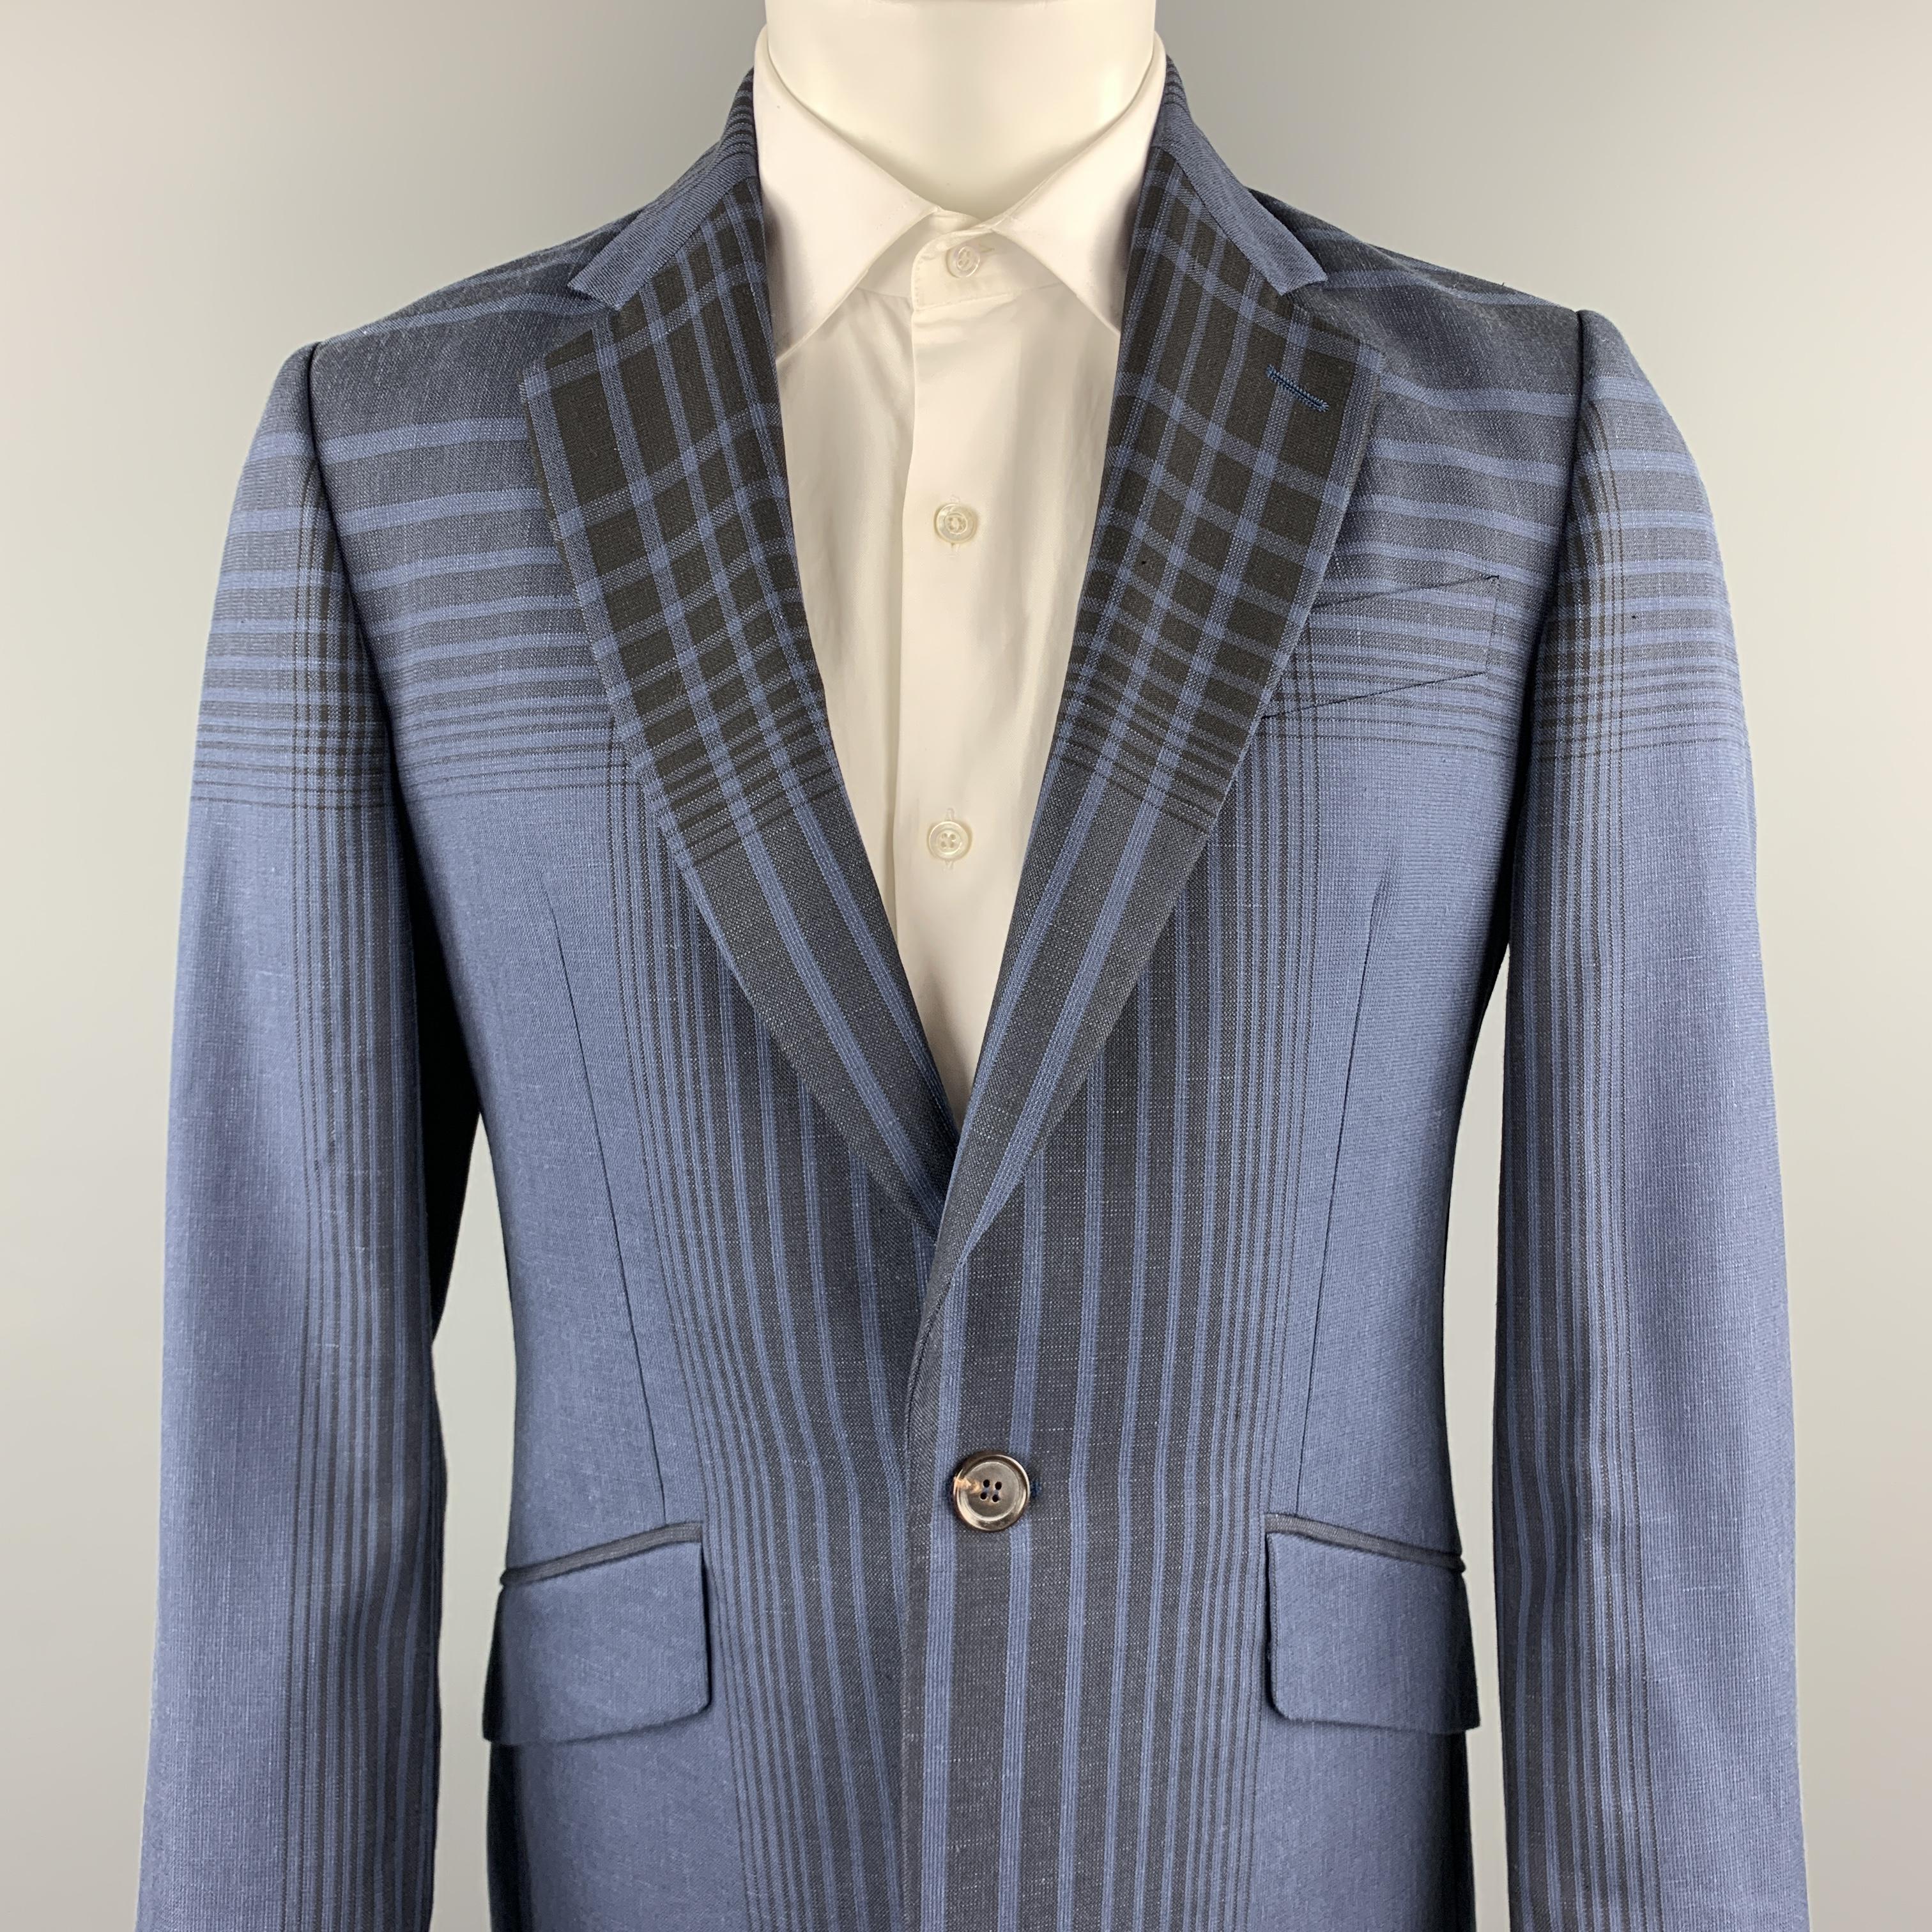 VIVIENNE WESTWOOD MAN sport coat comes in a navy plaid wool blend featuring a notch lapel, flap pockets, and a single button closure. Made in Italy.

Excellent Pre-Owned Condition.
Marked: IT 50

Measurements:

Shoulder: 17.5 in.
Chest: 39